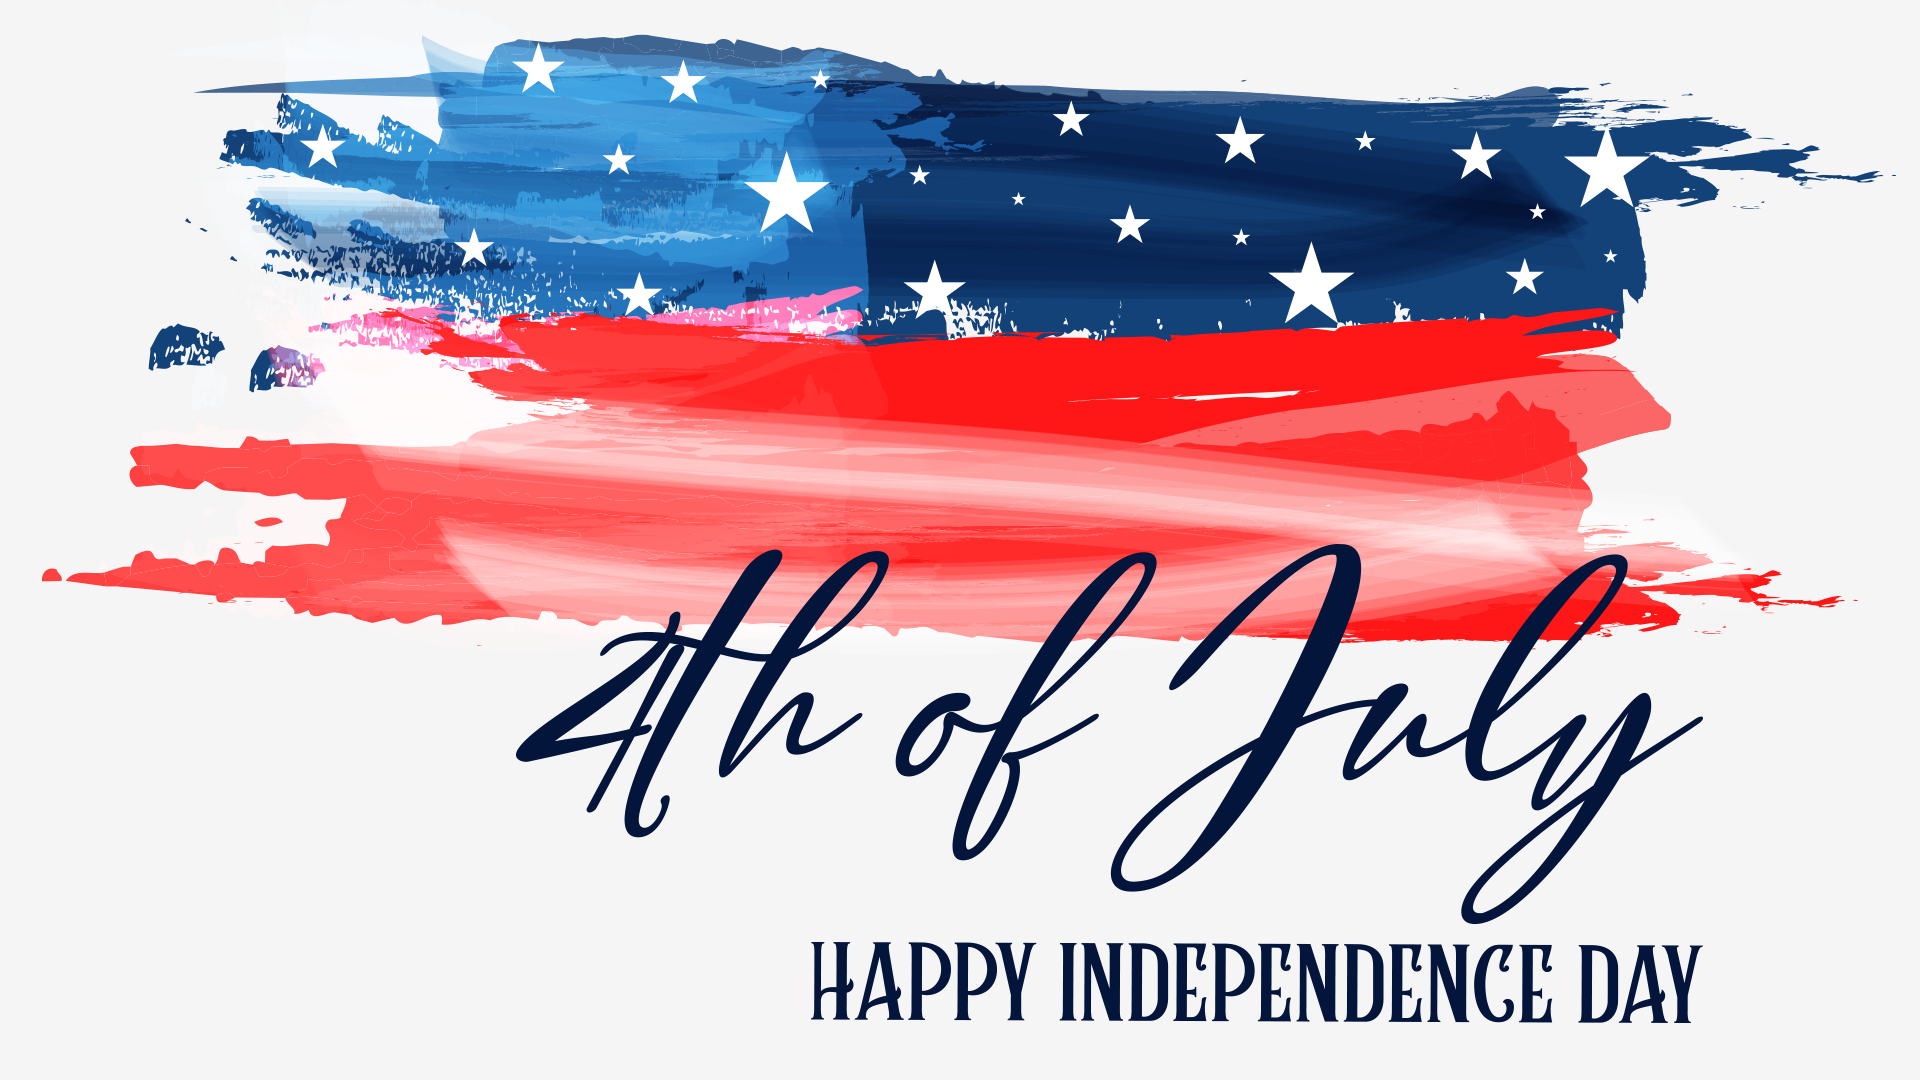 Free Graphic | Holidays | Independence Day